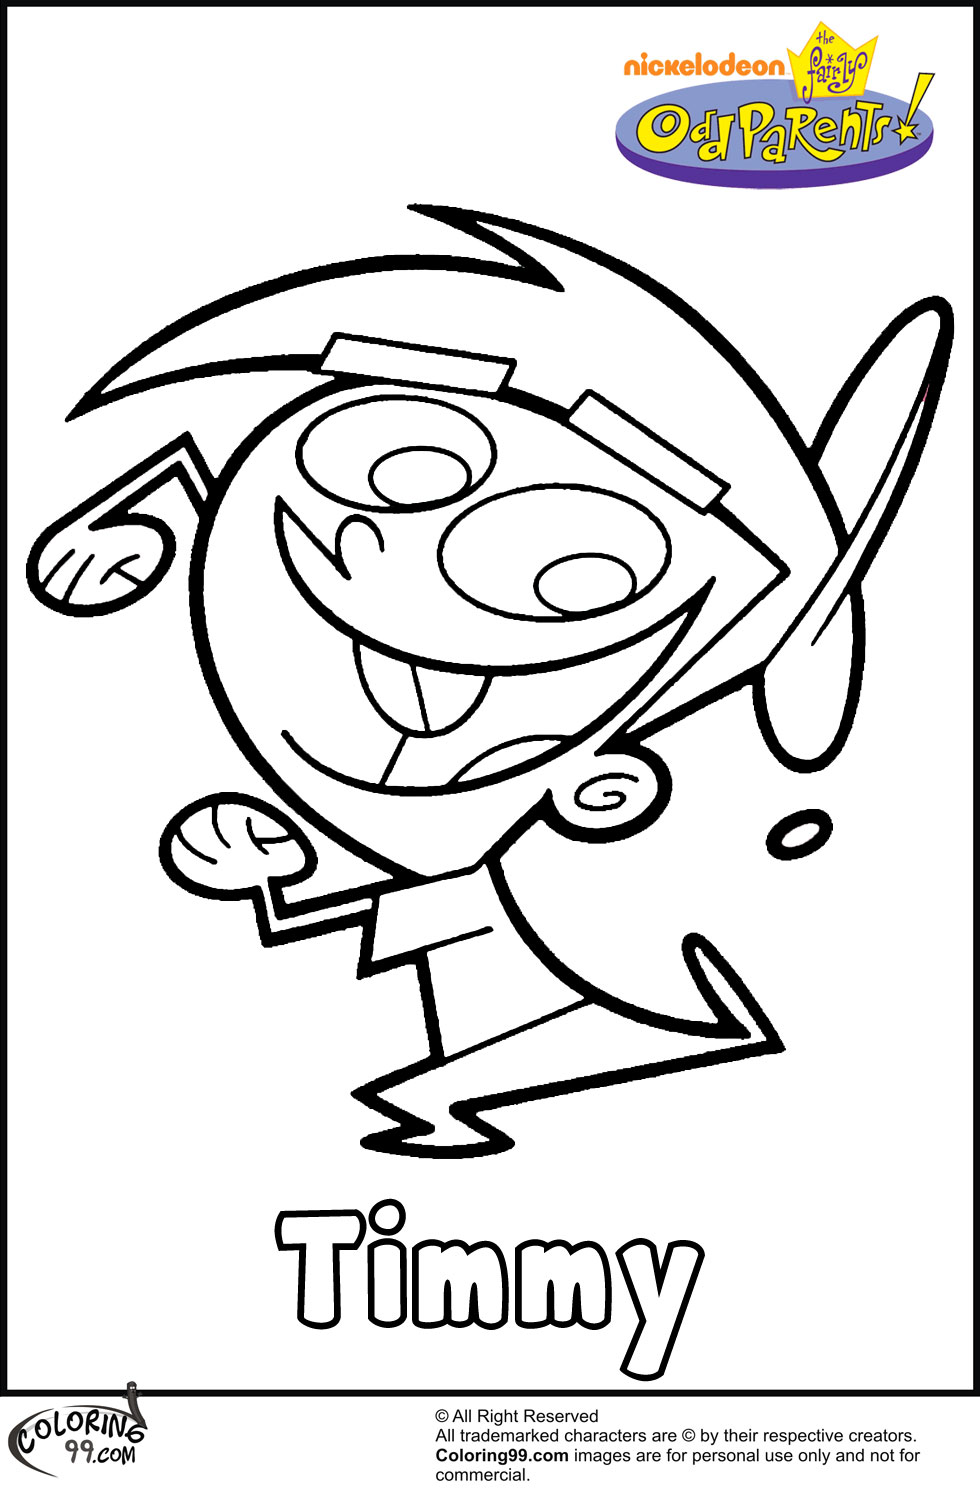 Fairly Odd Parents Coloring Pages | Minister Coloring